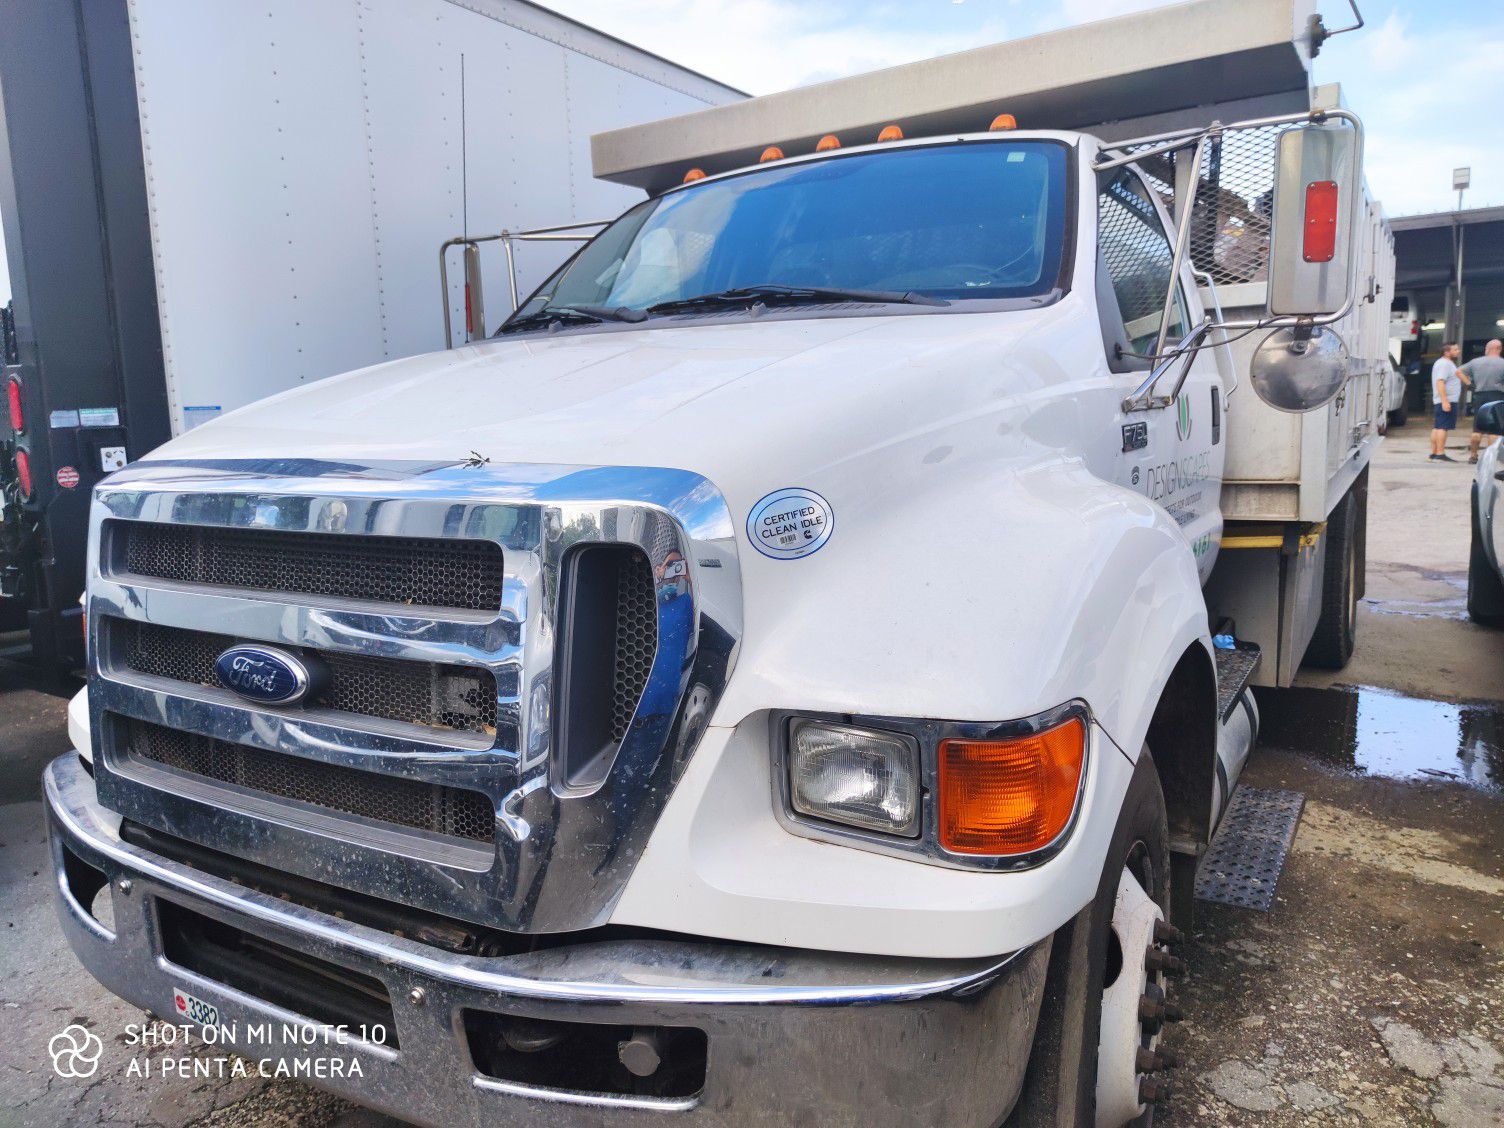 2015 FORD 750 SUPER DUTY 20FT ALLOY DUMP BED ONE OWNER ONLY 40K LIKE NEW CLEAN UNIT READY TO WORK NEED FINANCING CONTACT OLIVER 305TRUCKGURU